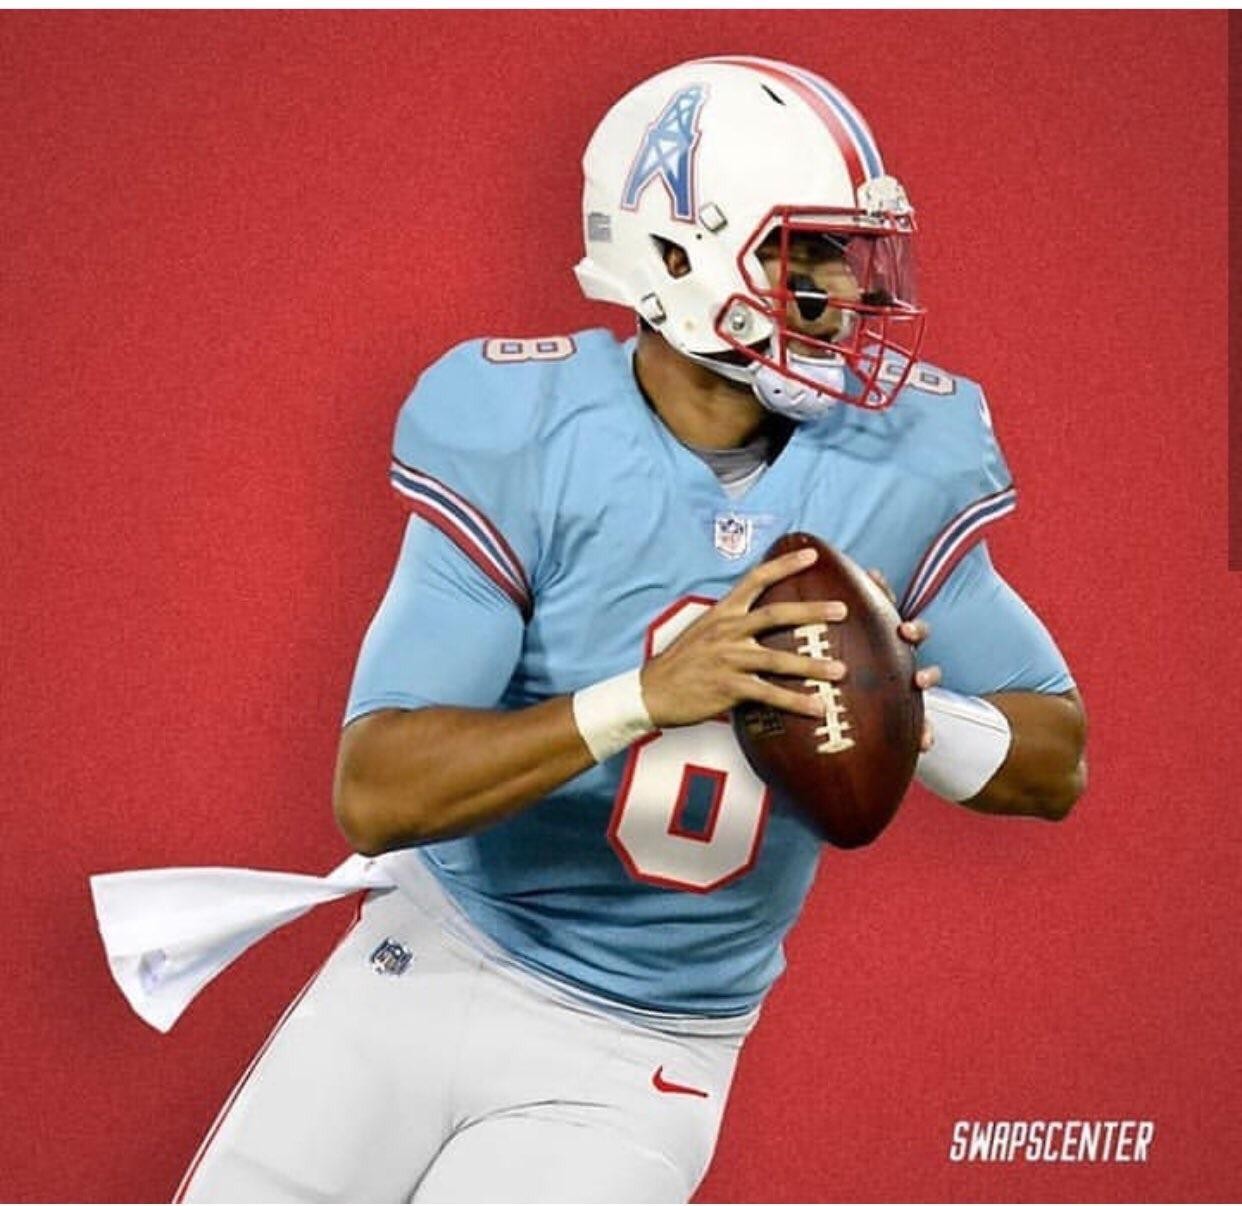 Titans Oilers throwback jerseys leaked Twitter - Music City Miracles